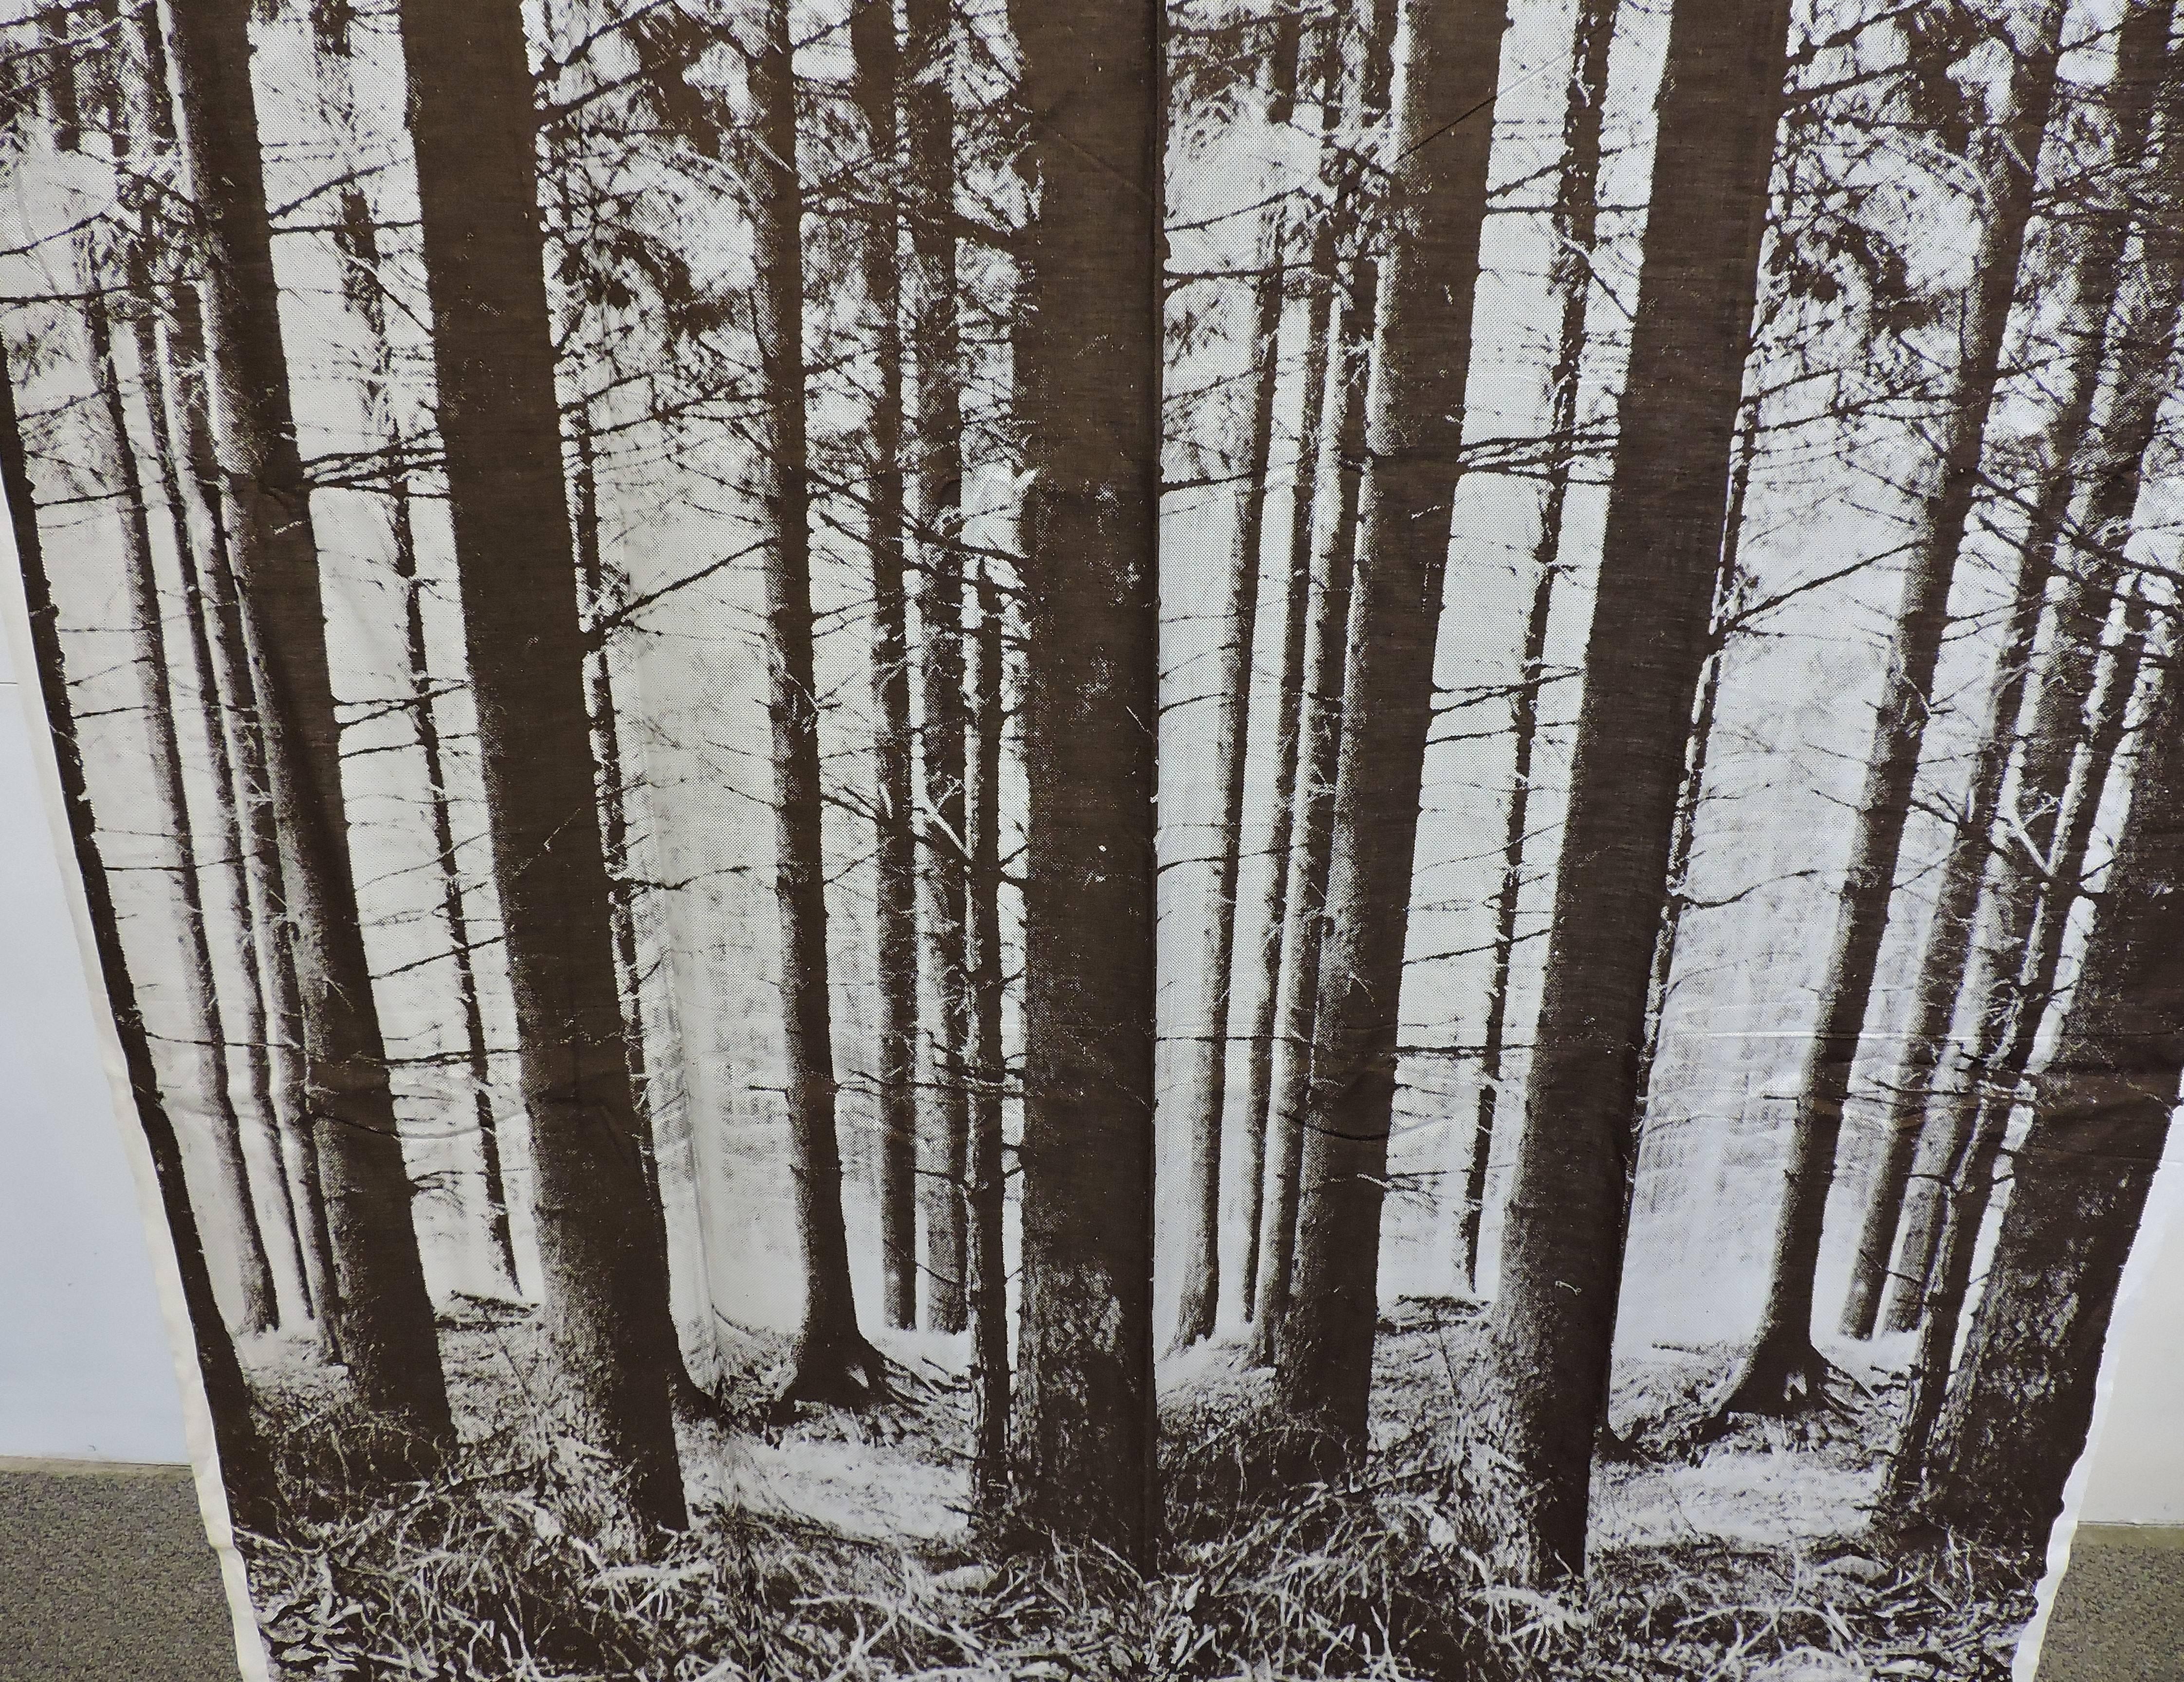 Striking large format photo art print on fabric titled The Pinewood by Robert Hansen and printed by Grautex, Copenhagen. Tall trees in sepia tones have been hand printed on cotton, 97 inches high by 48 inches wide. It can be placed on stretchers and